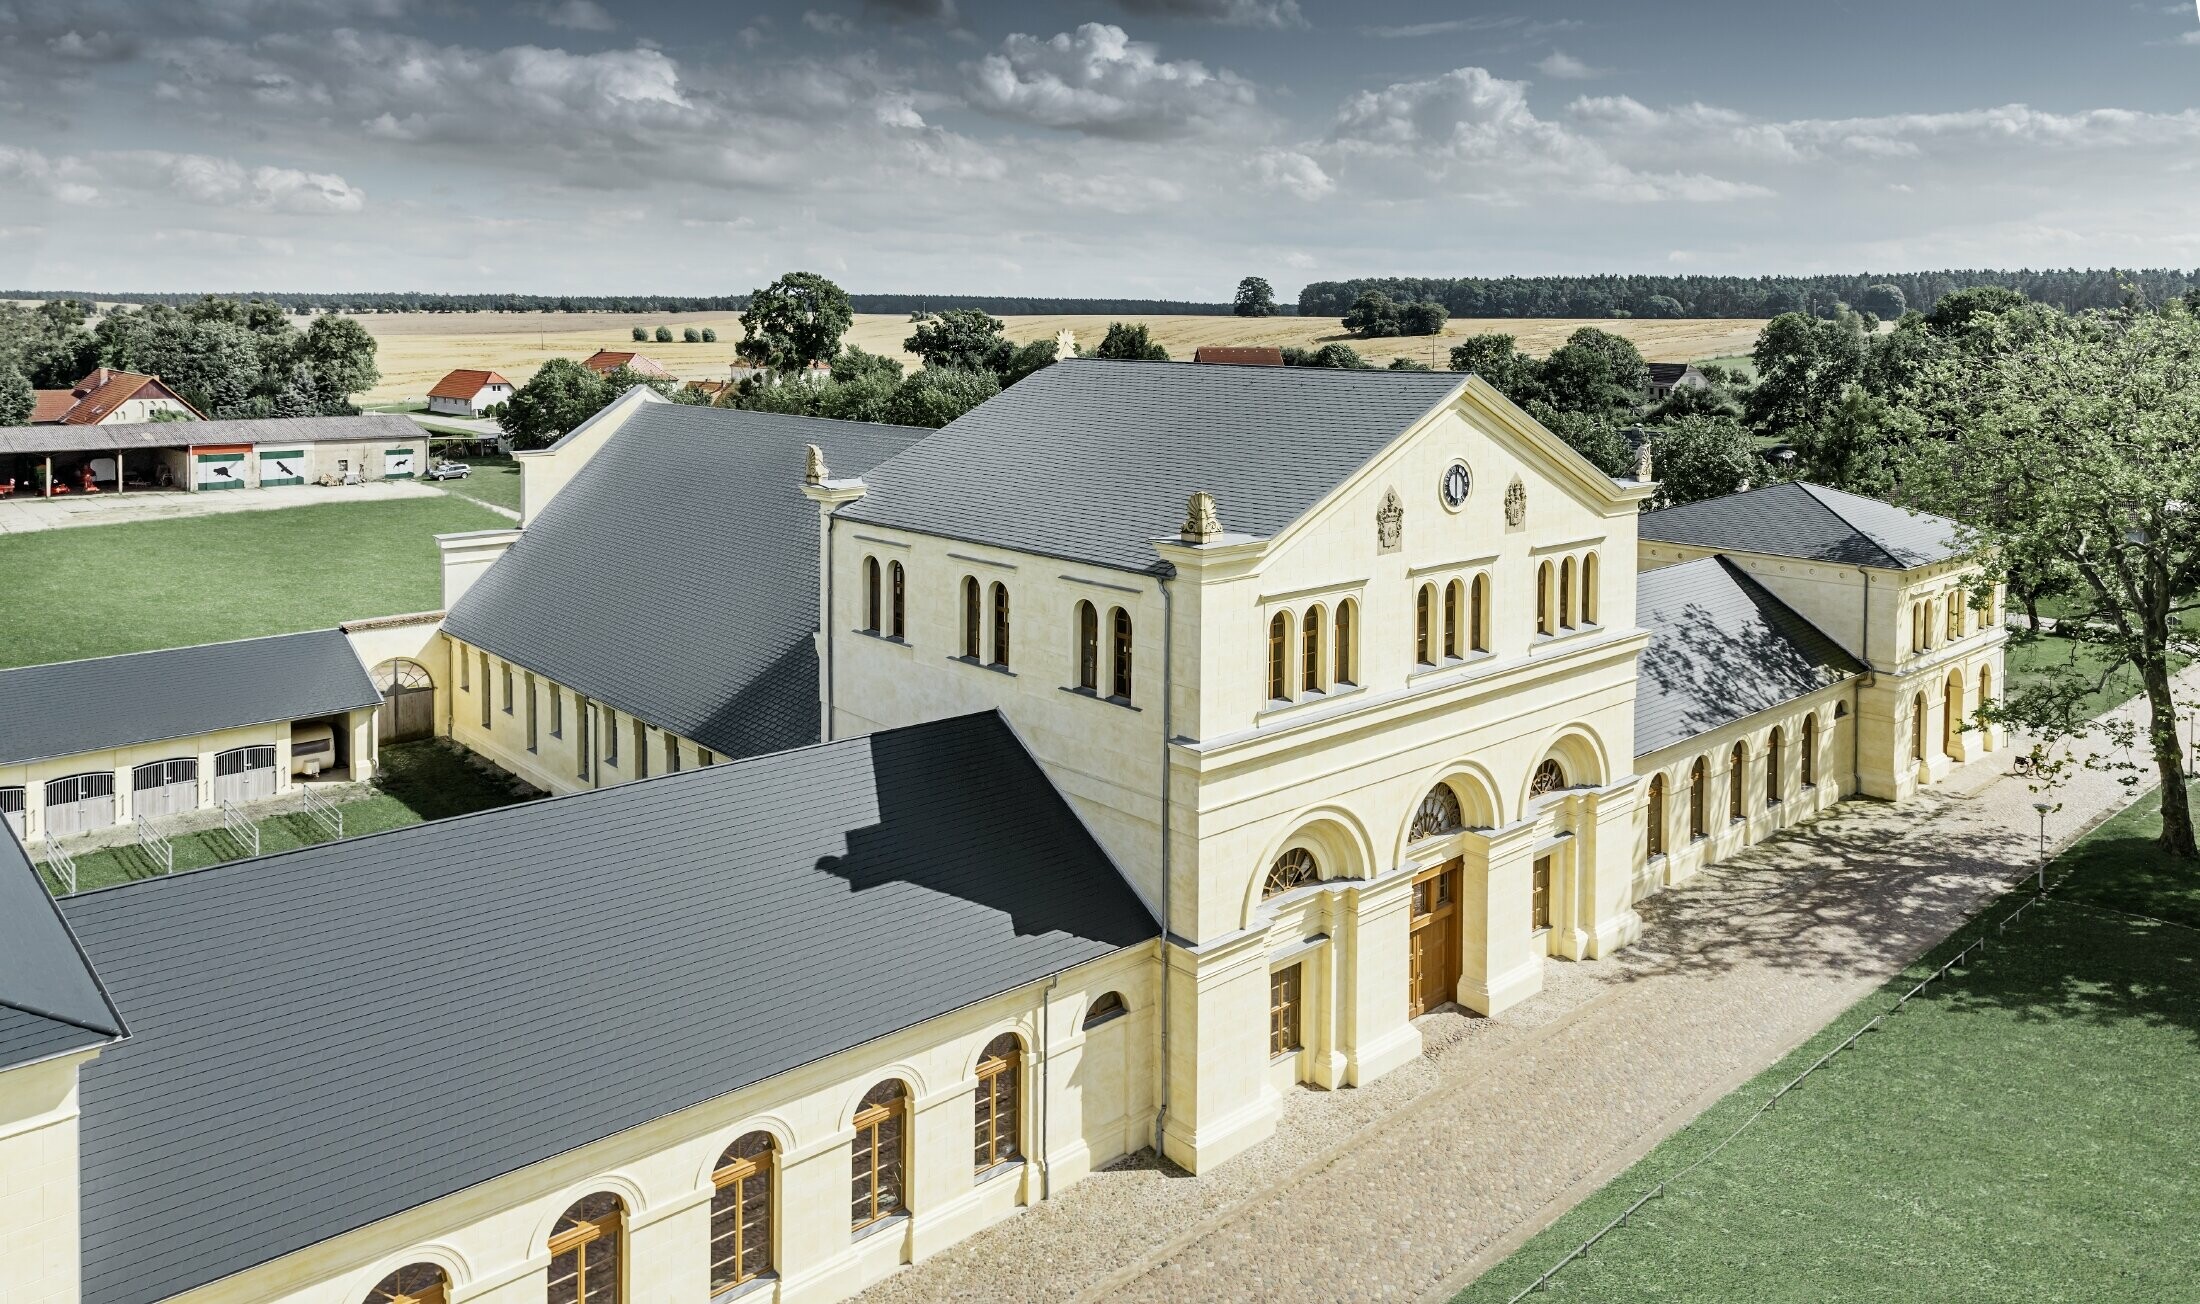 Photo of the main section of the stables in Basedow; the castle was refurbished and the roof was covered with a PREFA lightweight aluminium roof in anthracite.